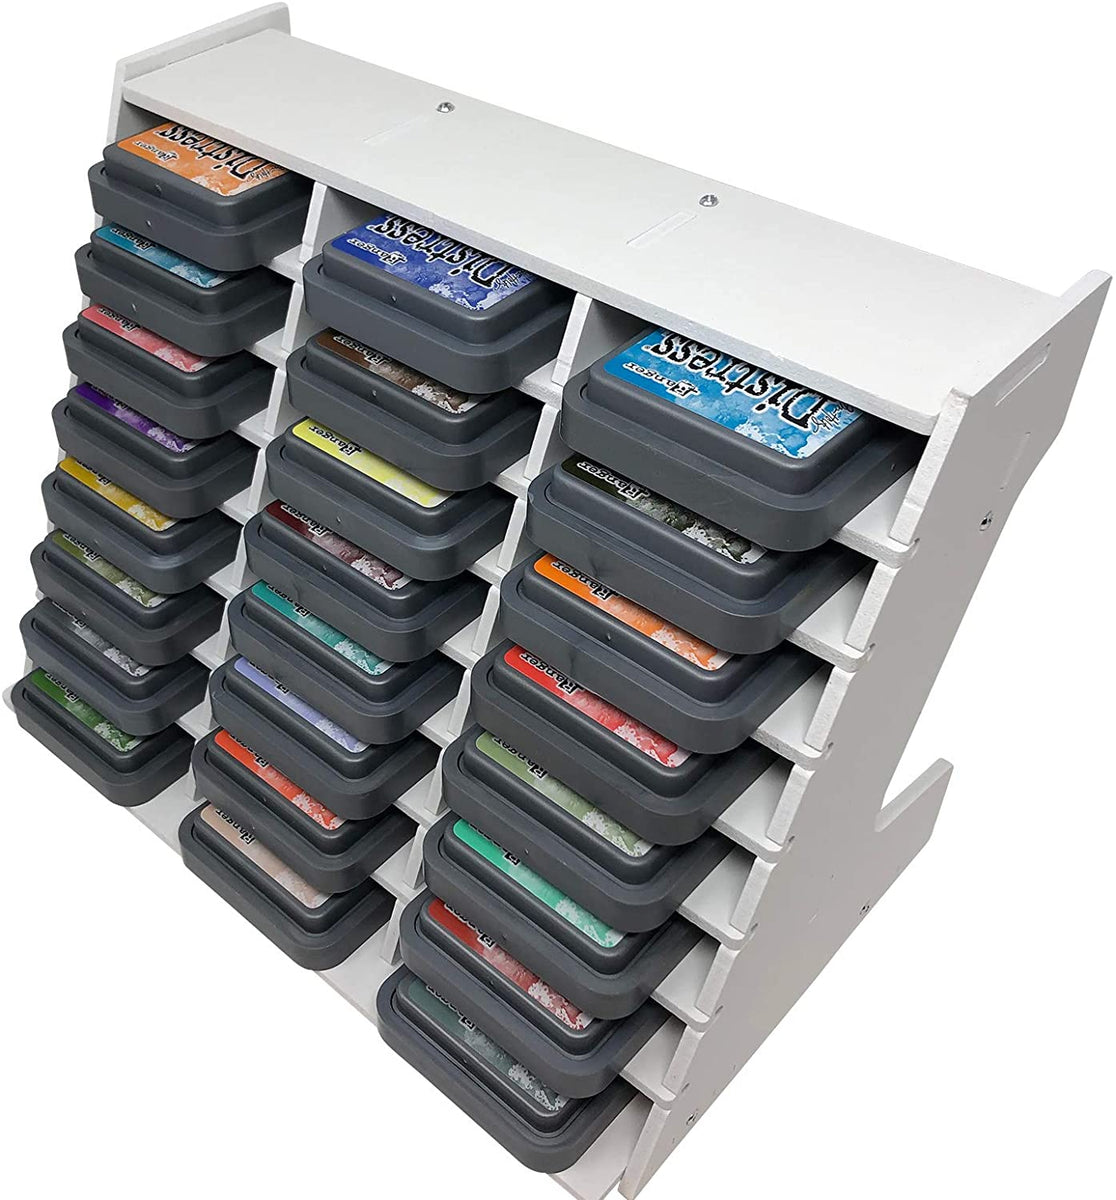 PIXISS Storage Holder For Ink Pads and Stamp Pads Storage – Pixiss